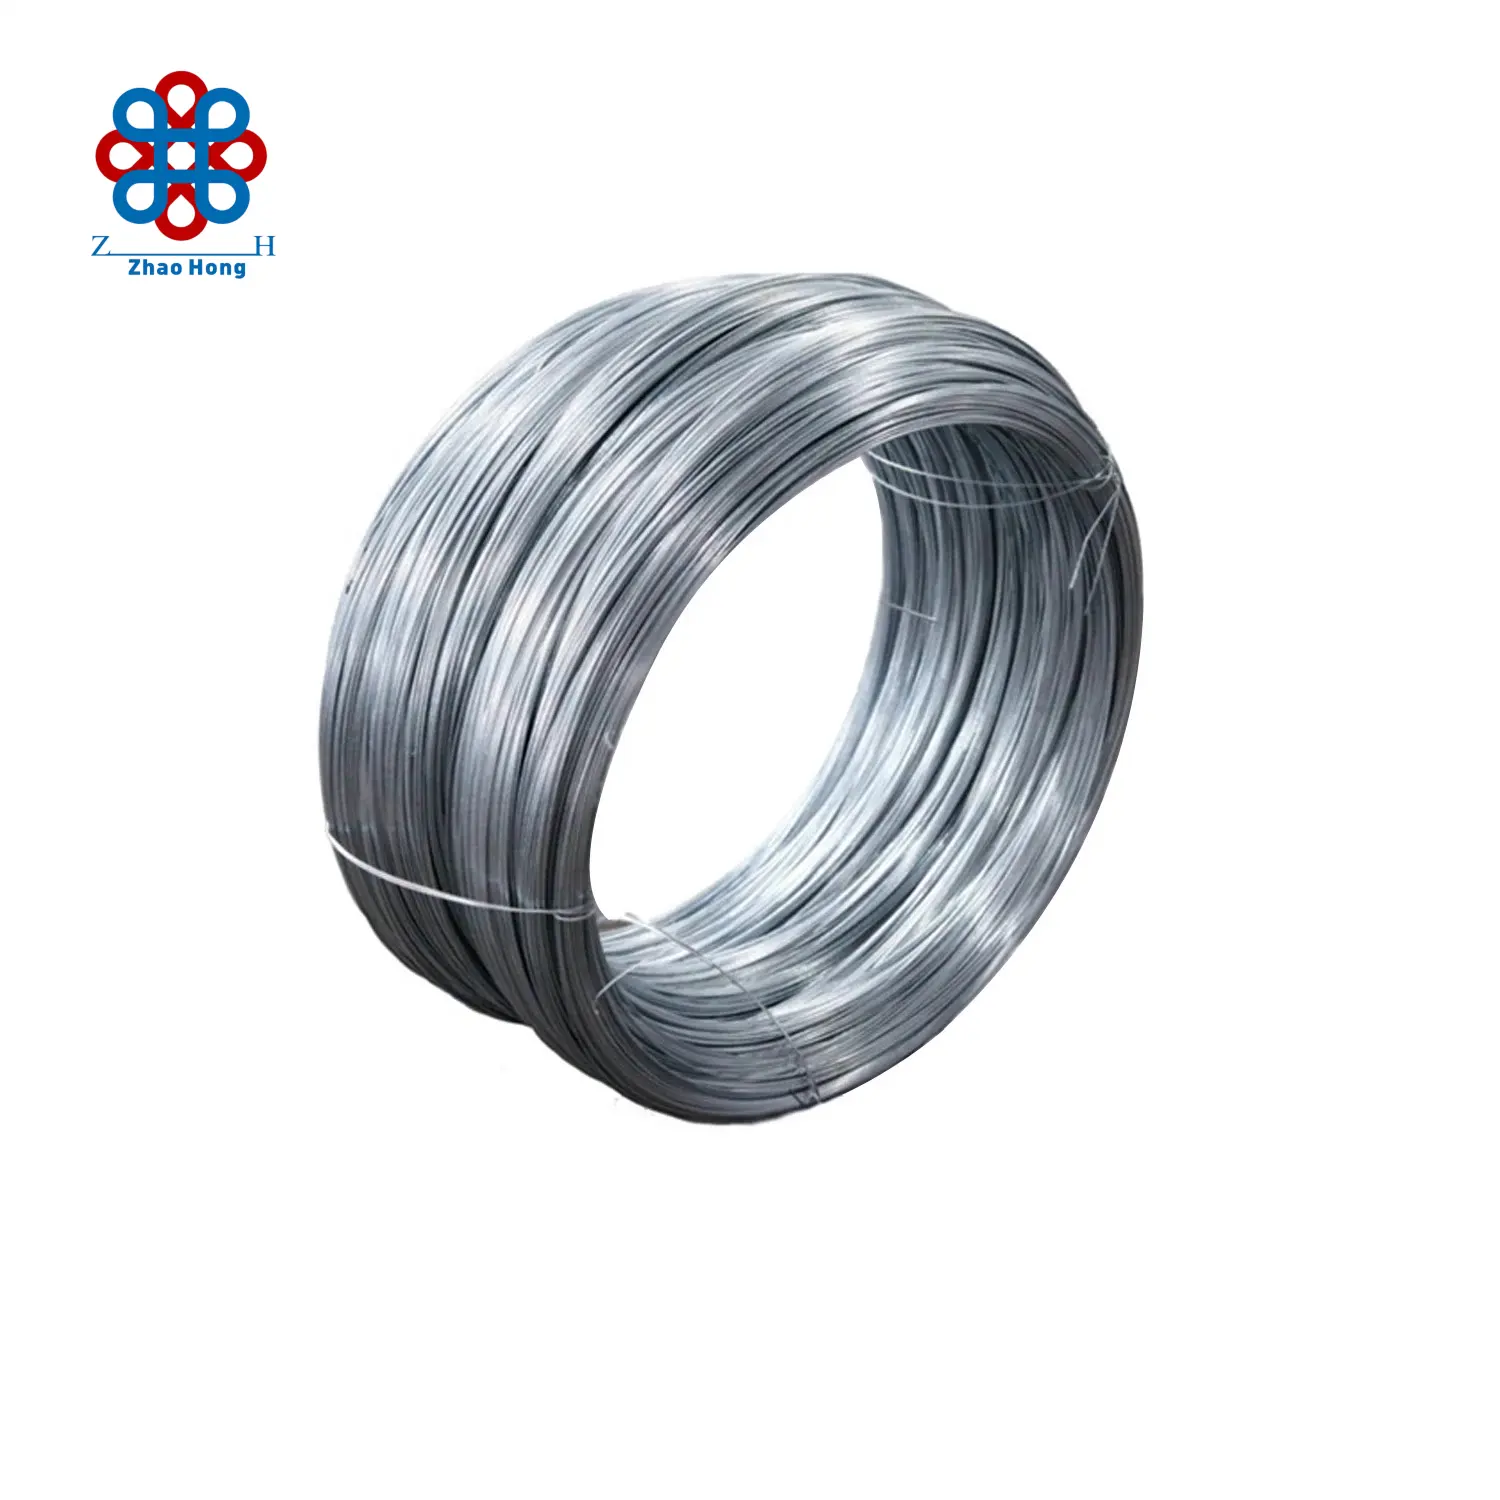 Iron Wire Binding Wire Alambre Galvanizado Hot Dipped Galvanized Iron Wire with Low Price